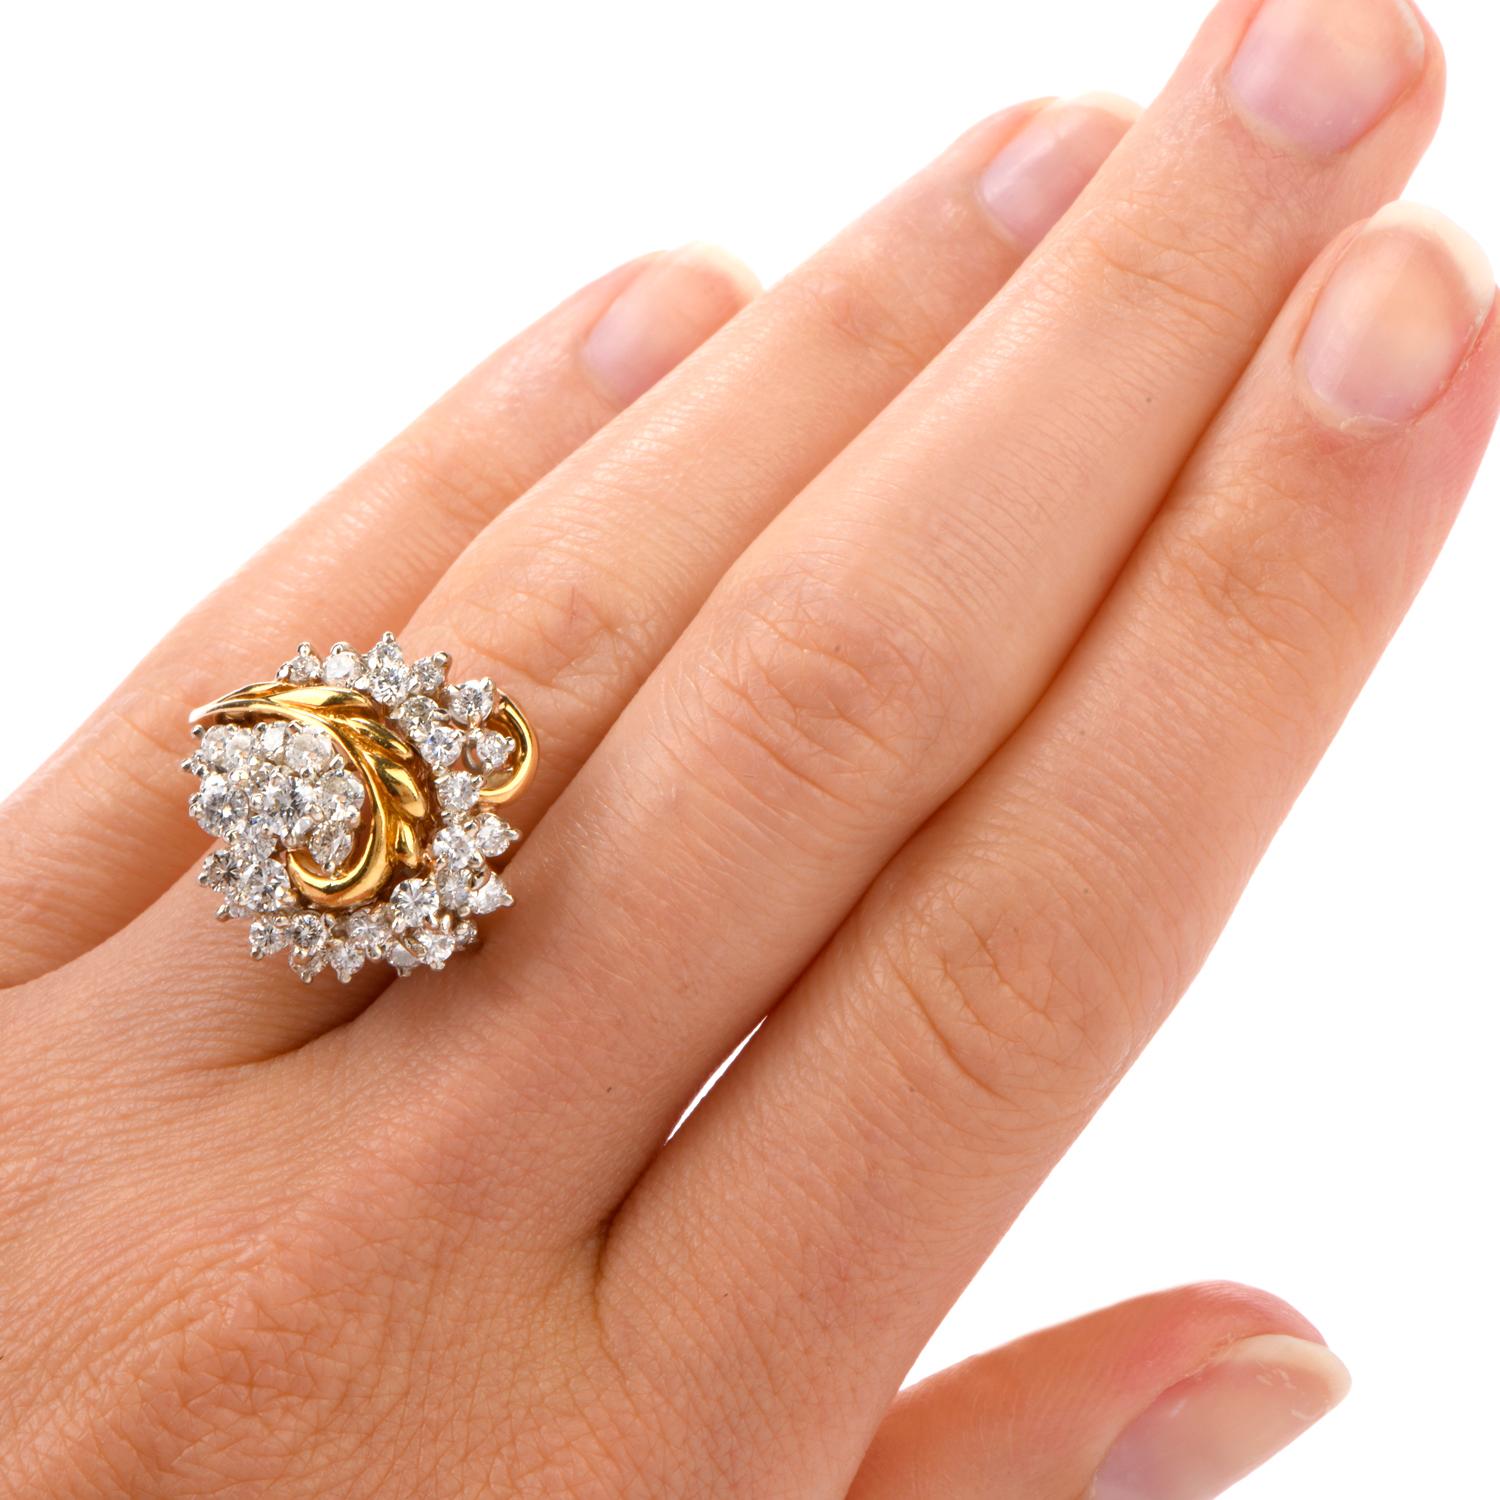 Present this flower for your next occassion!

This estate cocktail ring was inspired in a floral motif

and crafted in 11.4 grams of 18K yellow gold.

One shoulder of the ring winds up the center with a stem and leaves

to hold the flower consisting